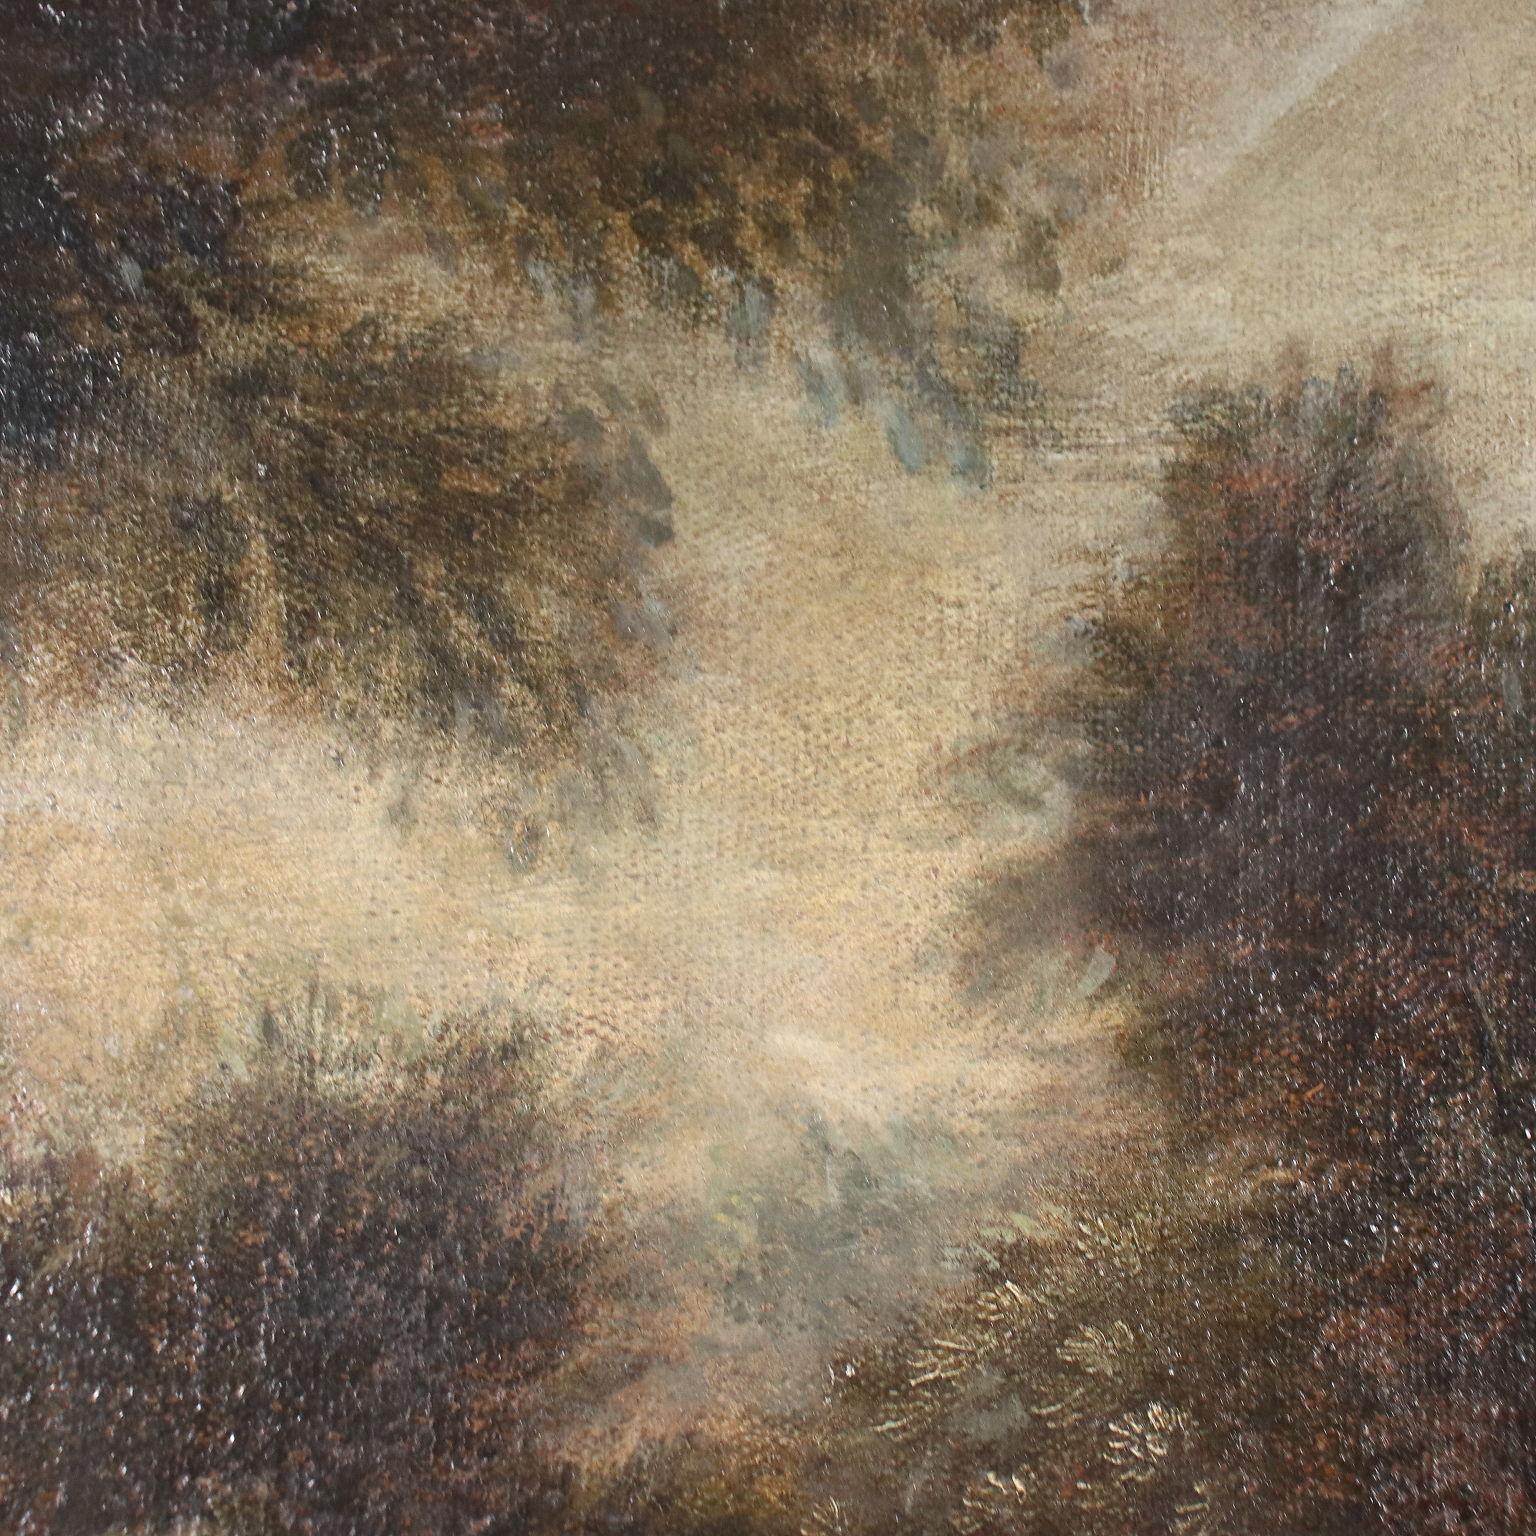 Landscape with Figures, oil on canvas, 18th century 1